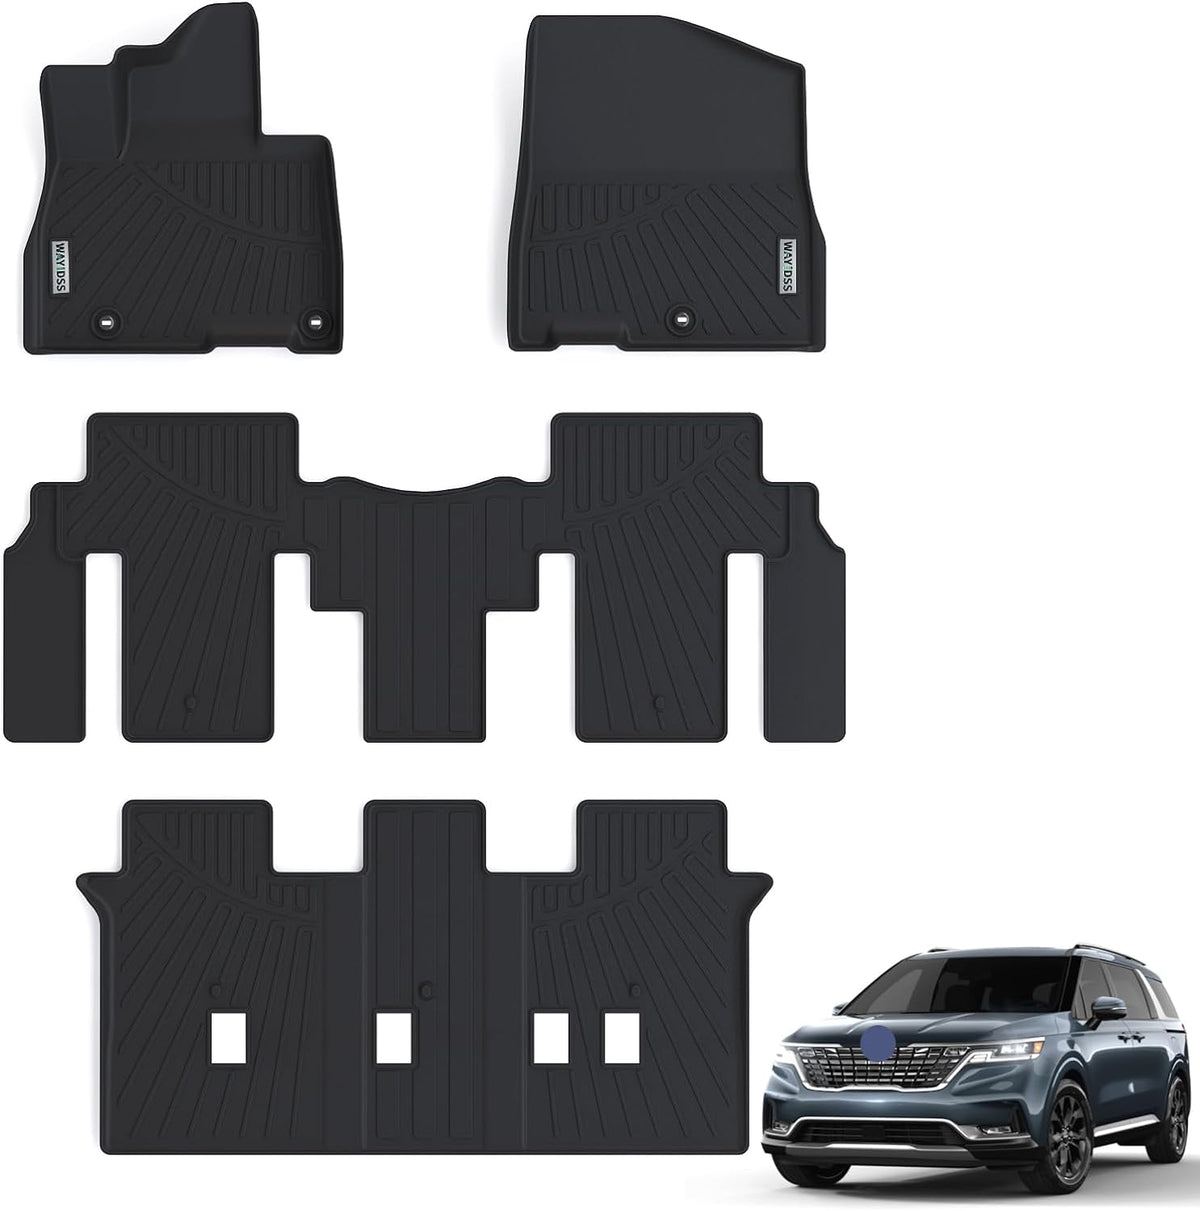 WAYIDSS Floor Mats for Kia Carnival 2022 2023 2024, 3 Rows Full Set(Only Fits 8 Seats Models.Fits LX w/seat Package, EX and SX. Does NOT fit Prestige Models),TPE All Weather Car Floor Liners